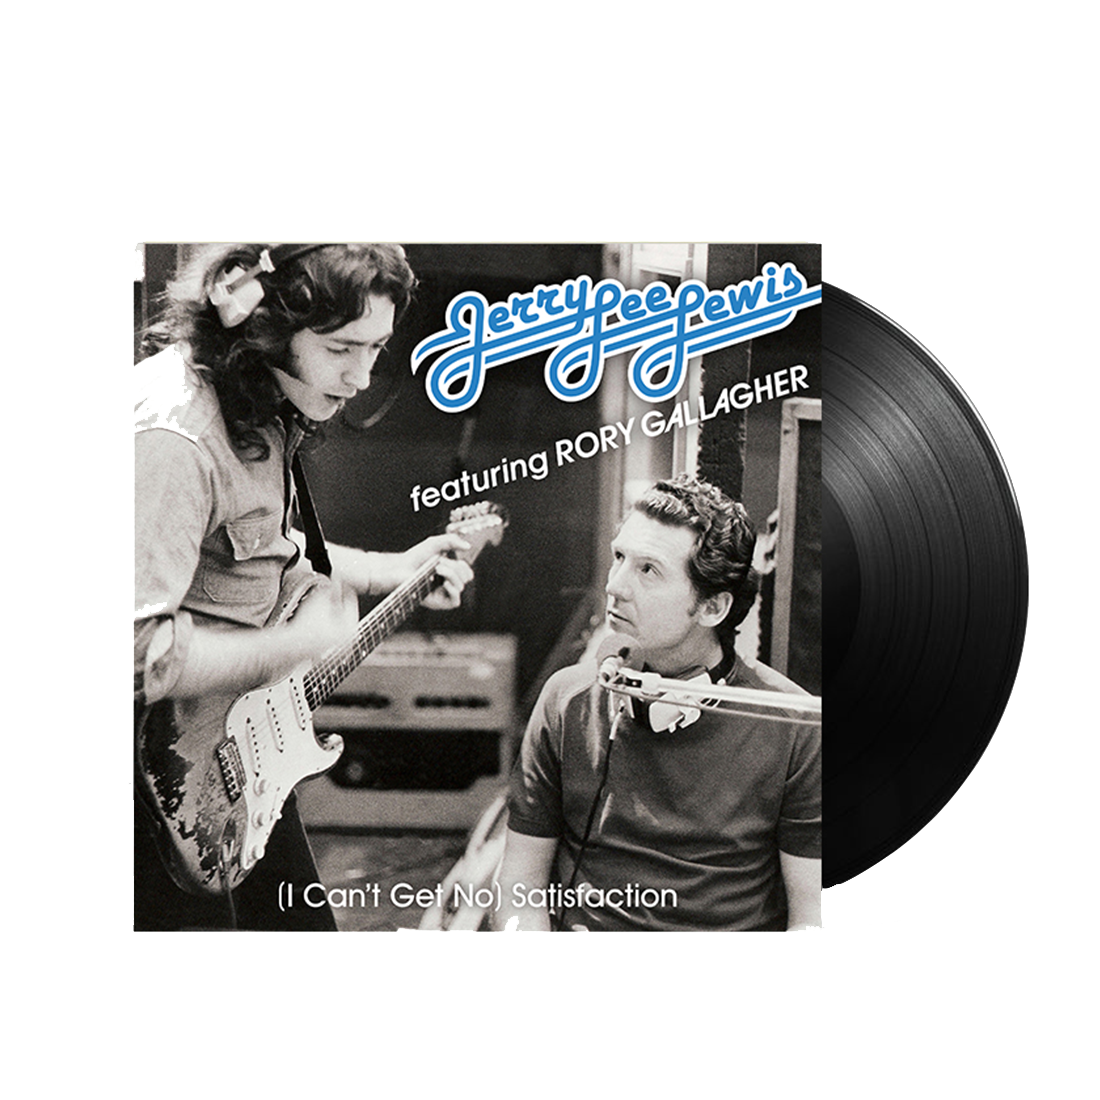 Rory Gallagher - (I Can’t Get No) Satisfaction: Exclusive 7" Vinyl